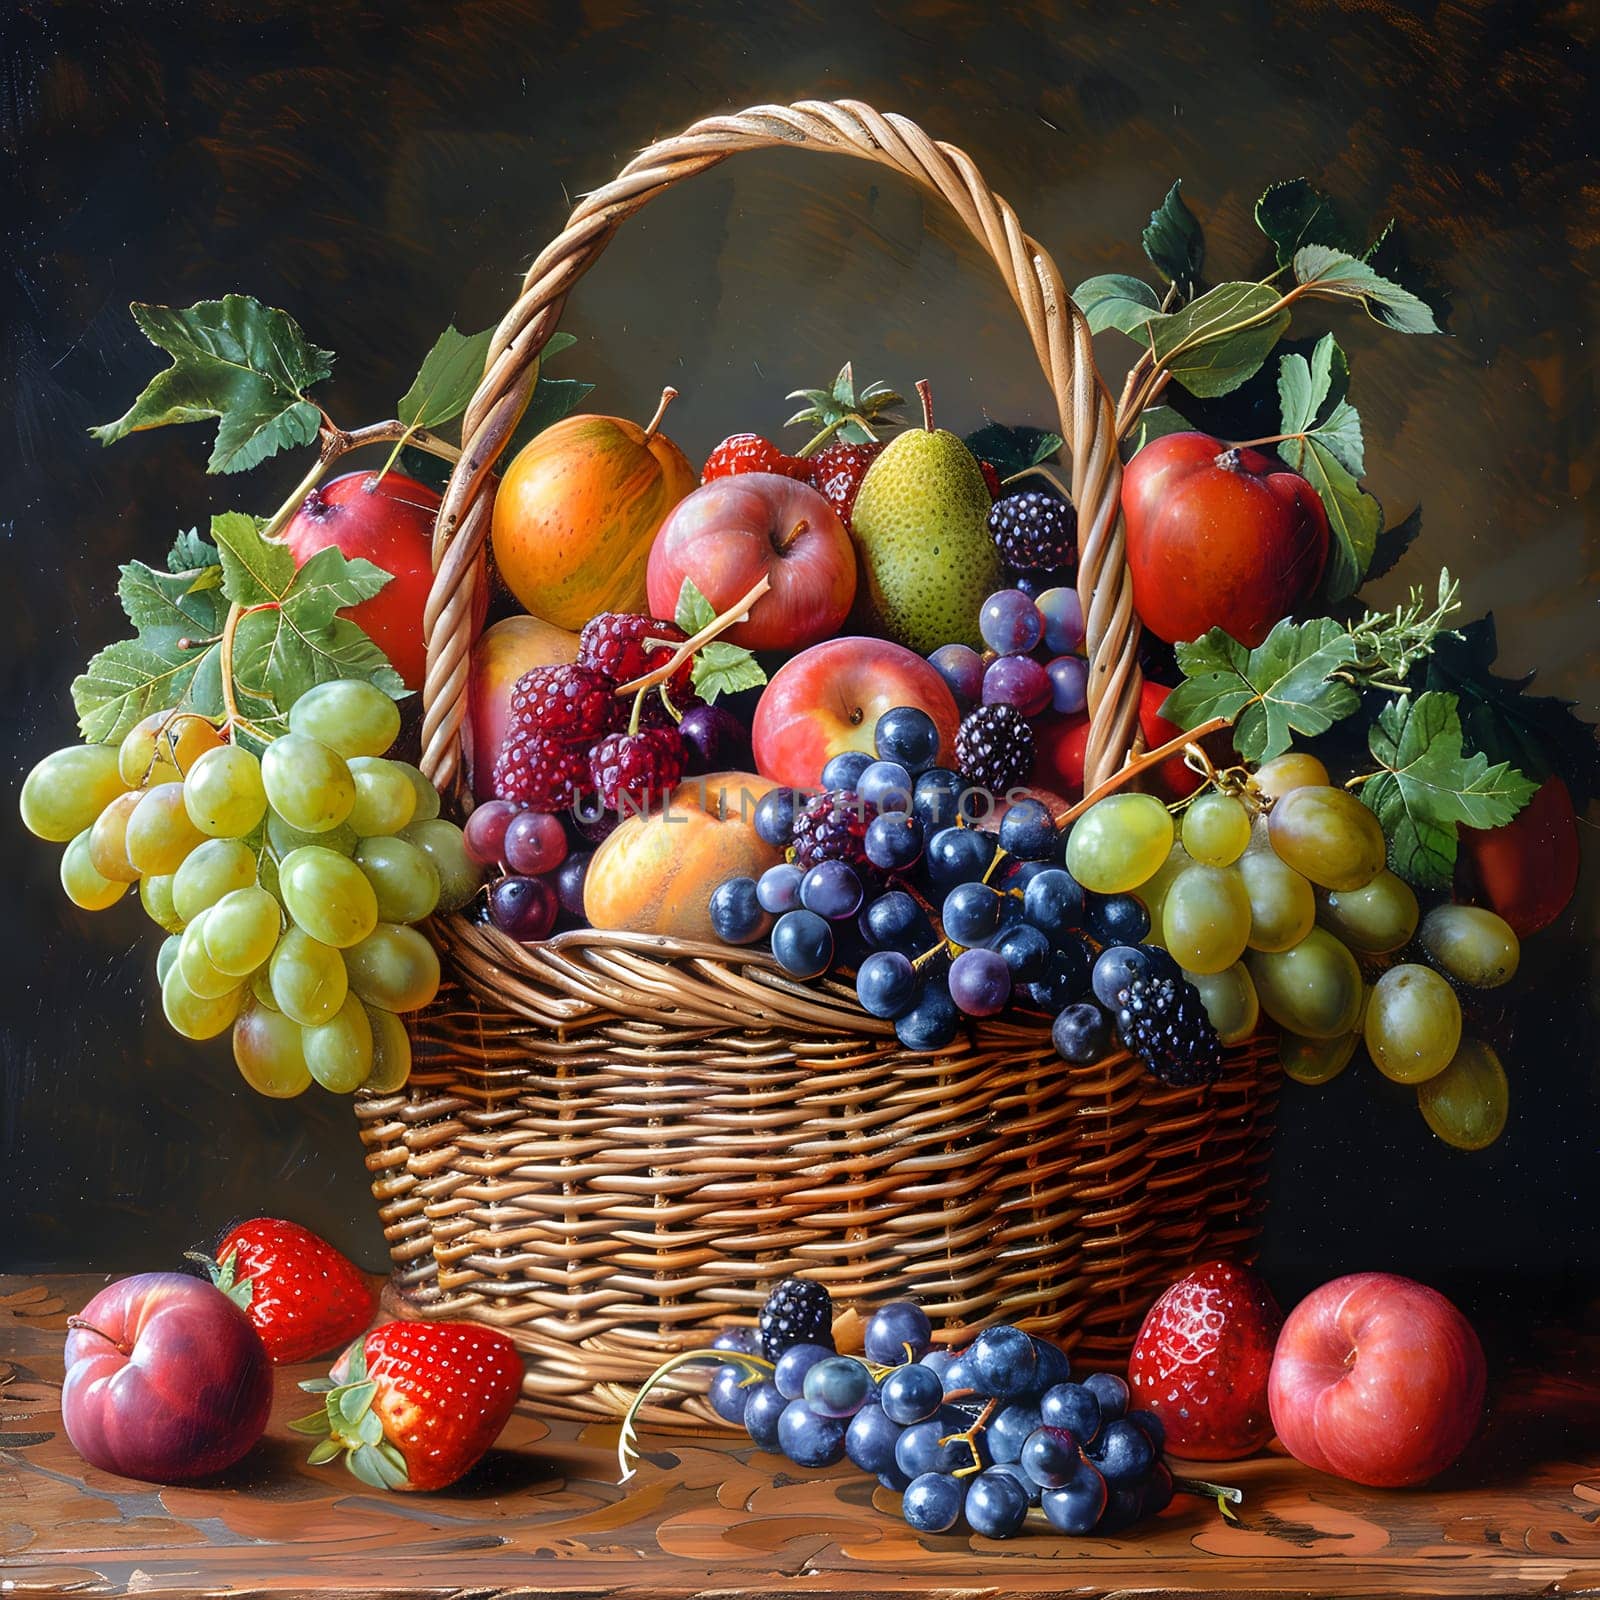 A basket filled with a variety of natural foods including seedless grapes, crisp apples, and juicy strawberries. All locally sourced produce, perfect for a wholesome snack